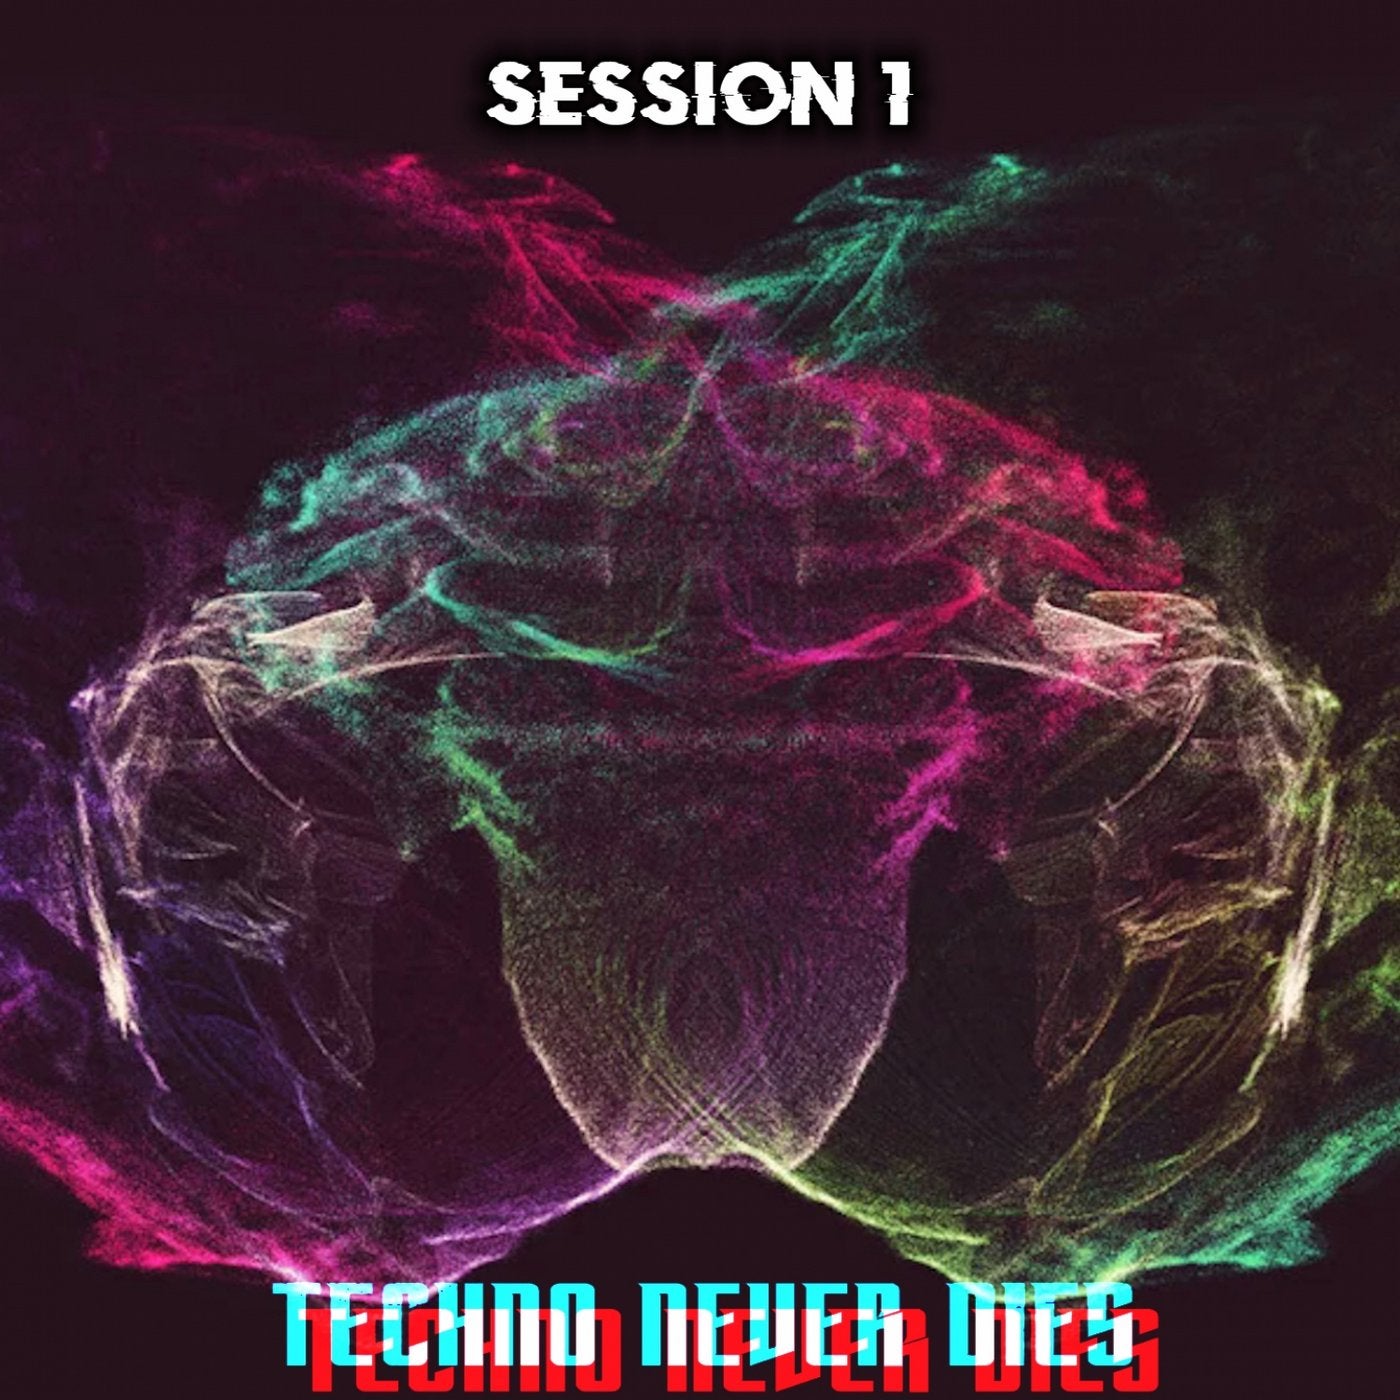 Techno Never Dies: Session 1